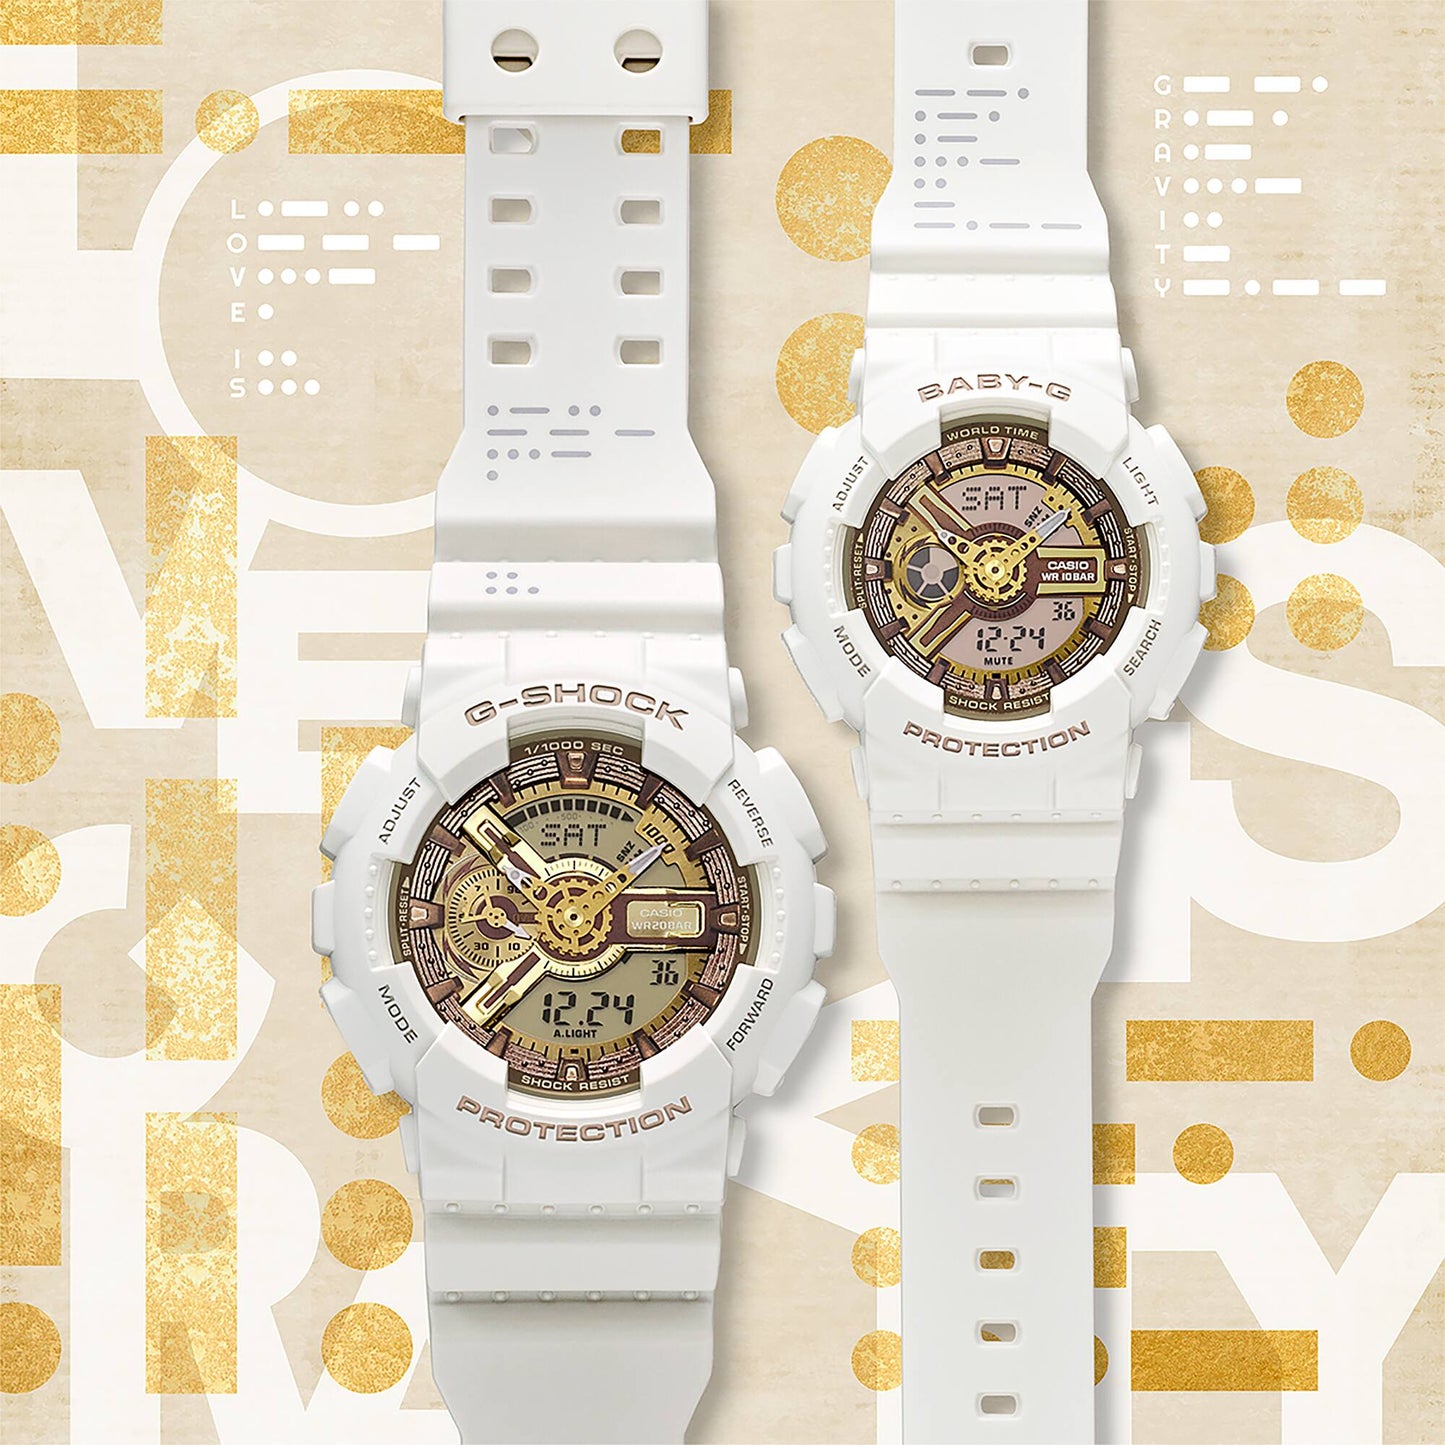 Casio G-Shock & Baby-G "Lover’s Collection" LOV-22A-7A